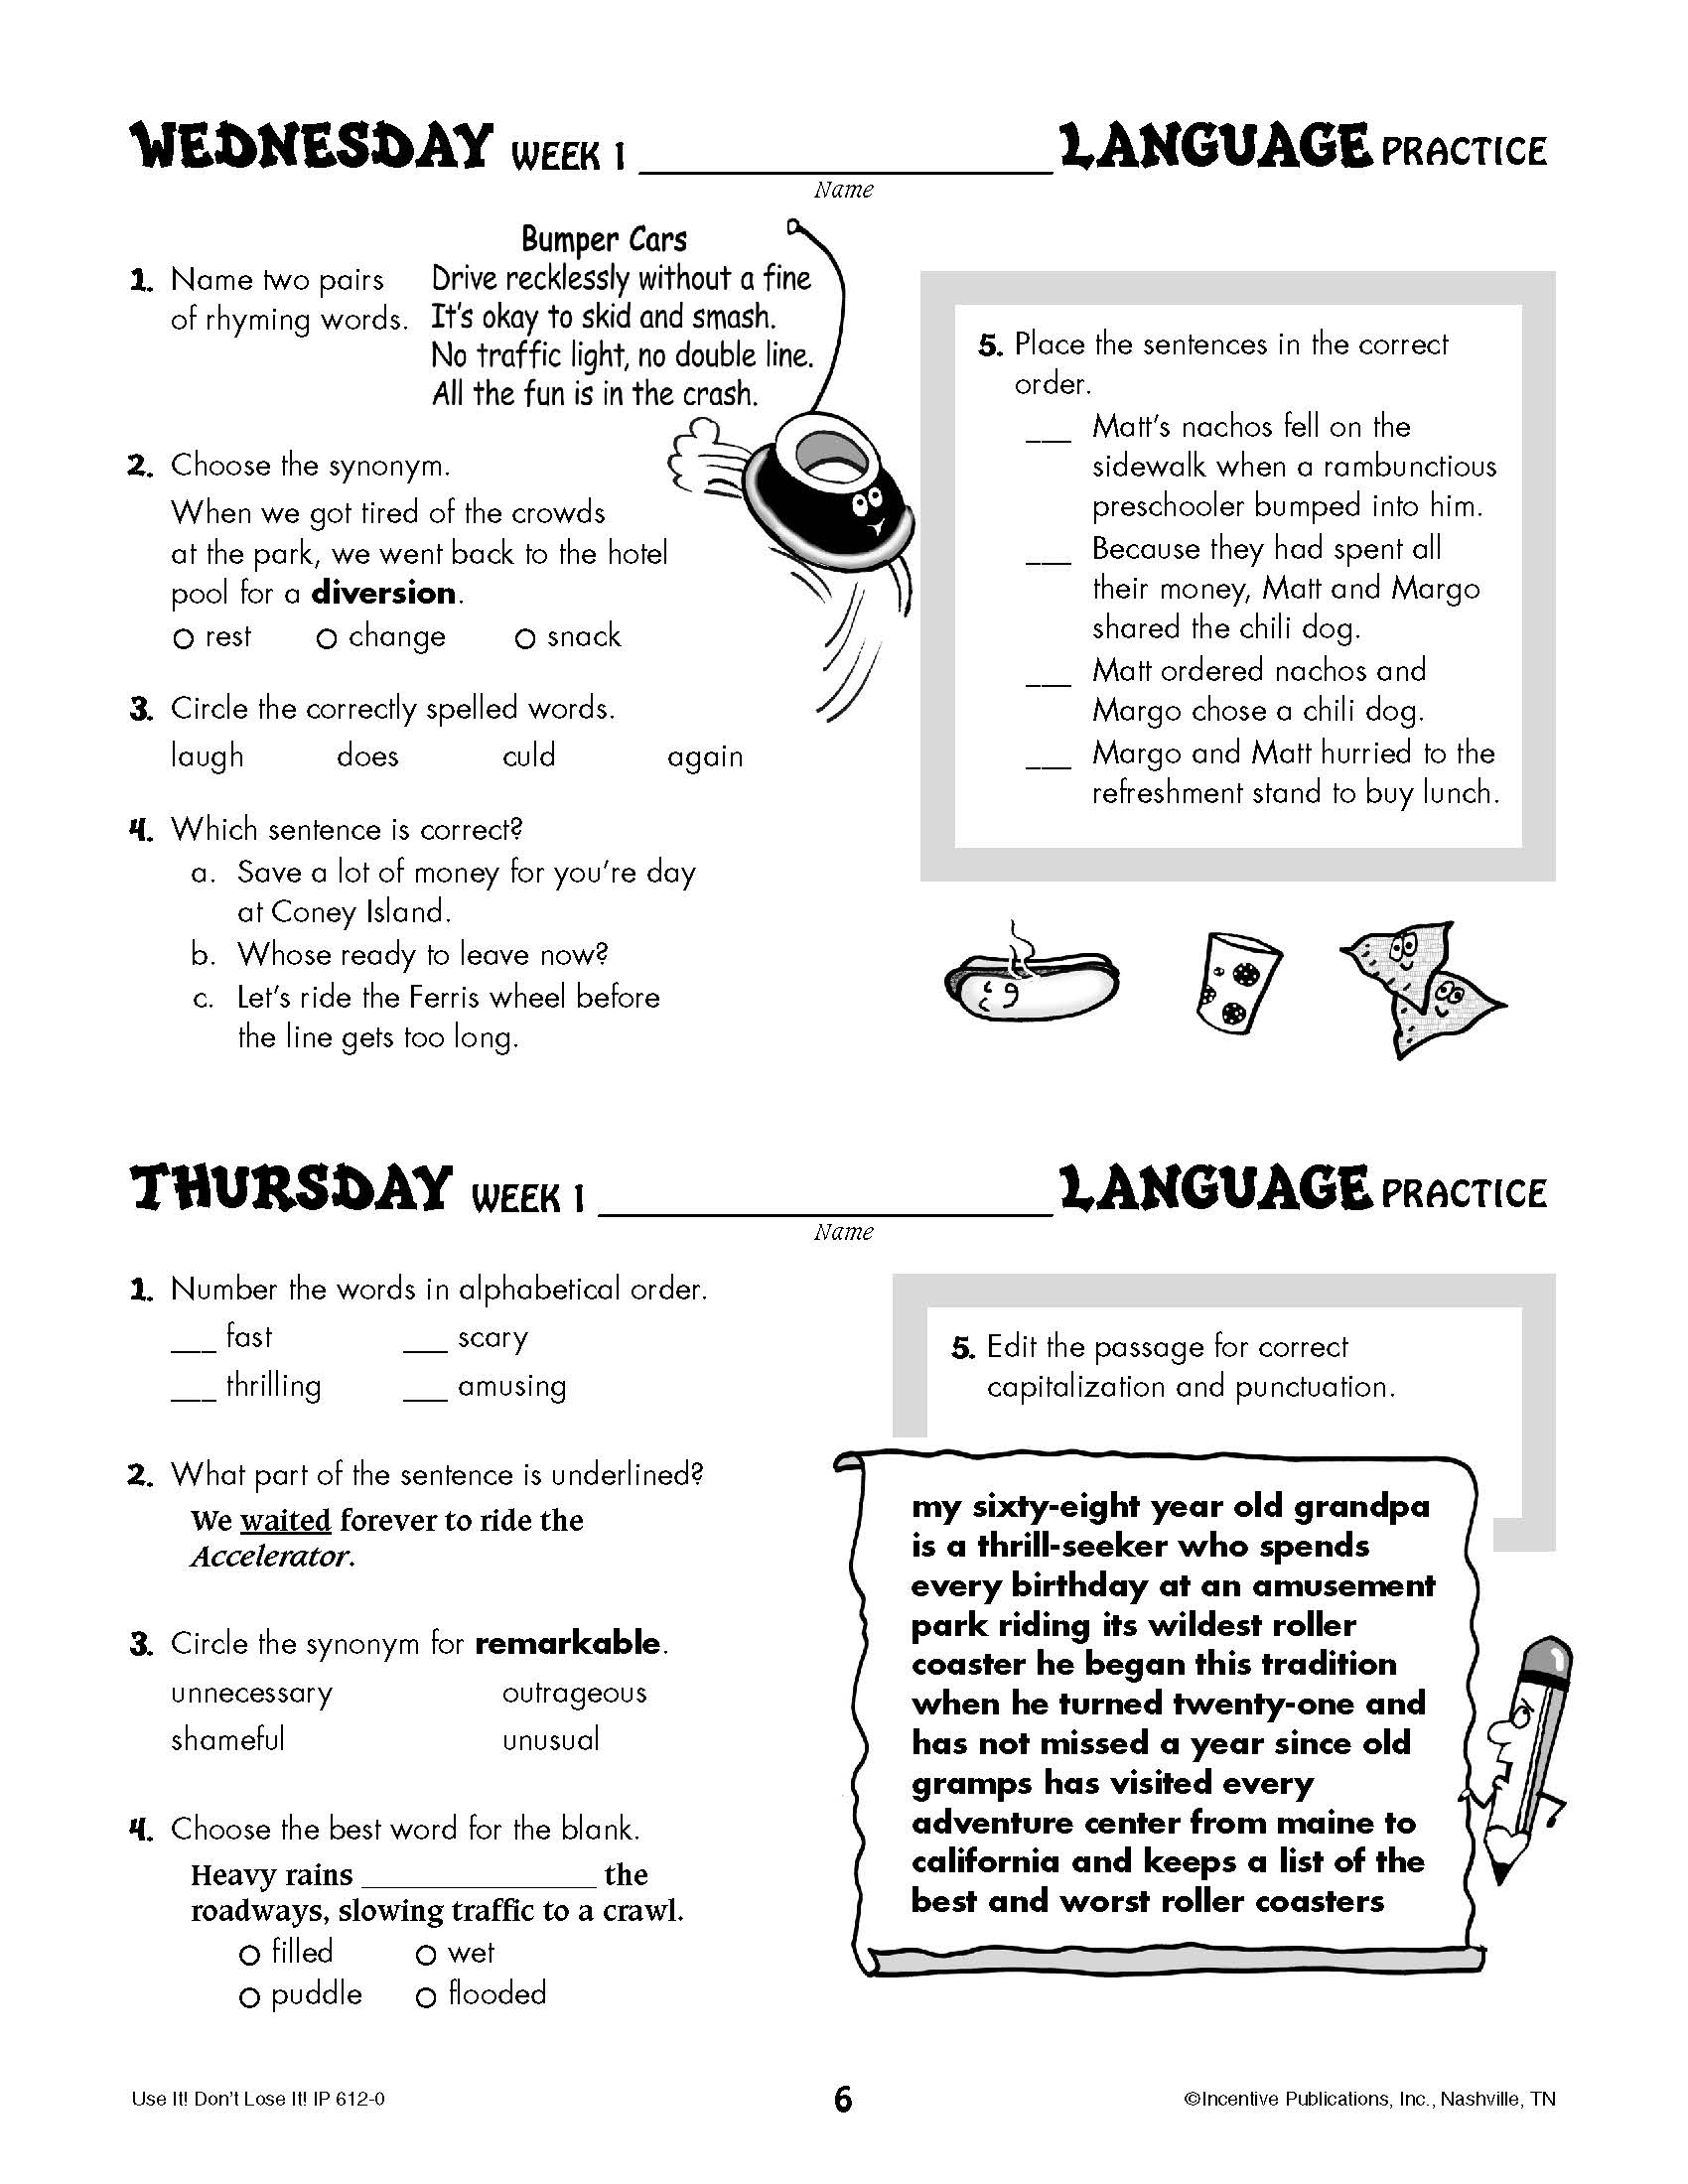 daily-language-practice-5th-grade-use-it-don-t-lose-it-world-book